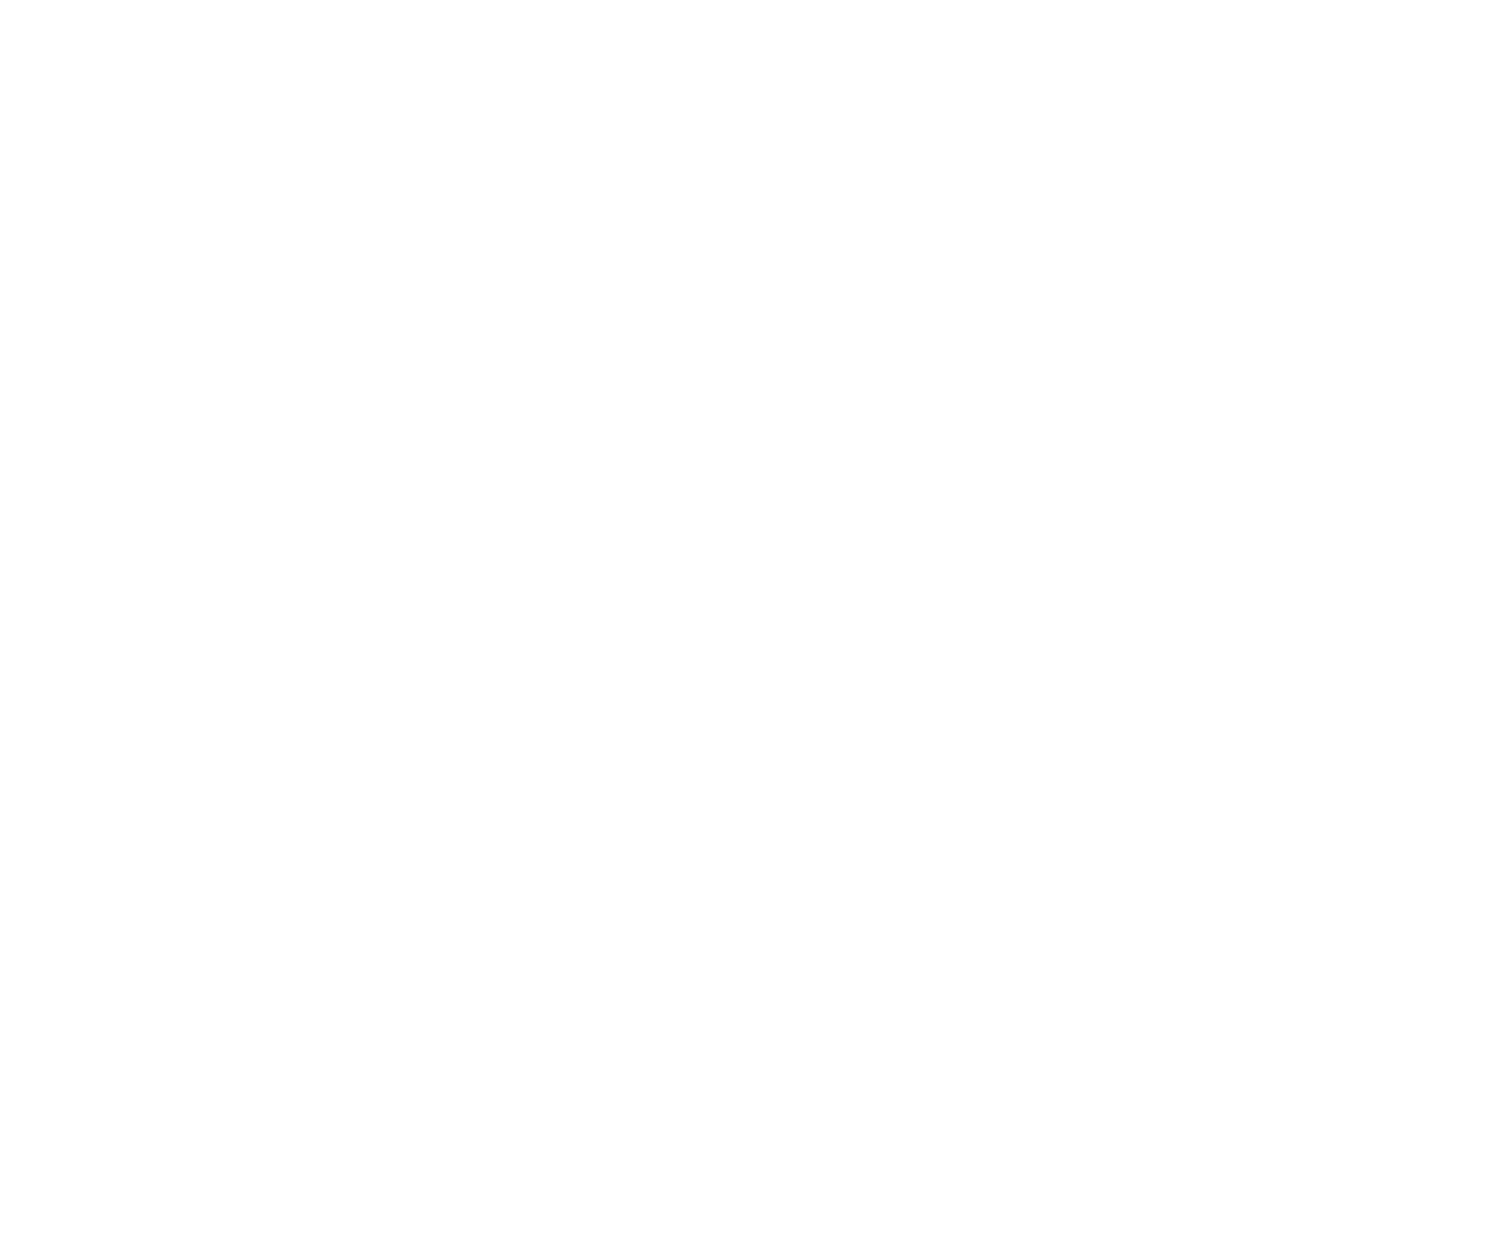 Trinity Grill and Social Marketplace